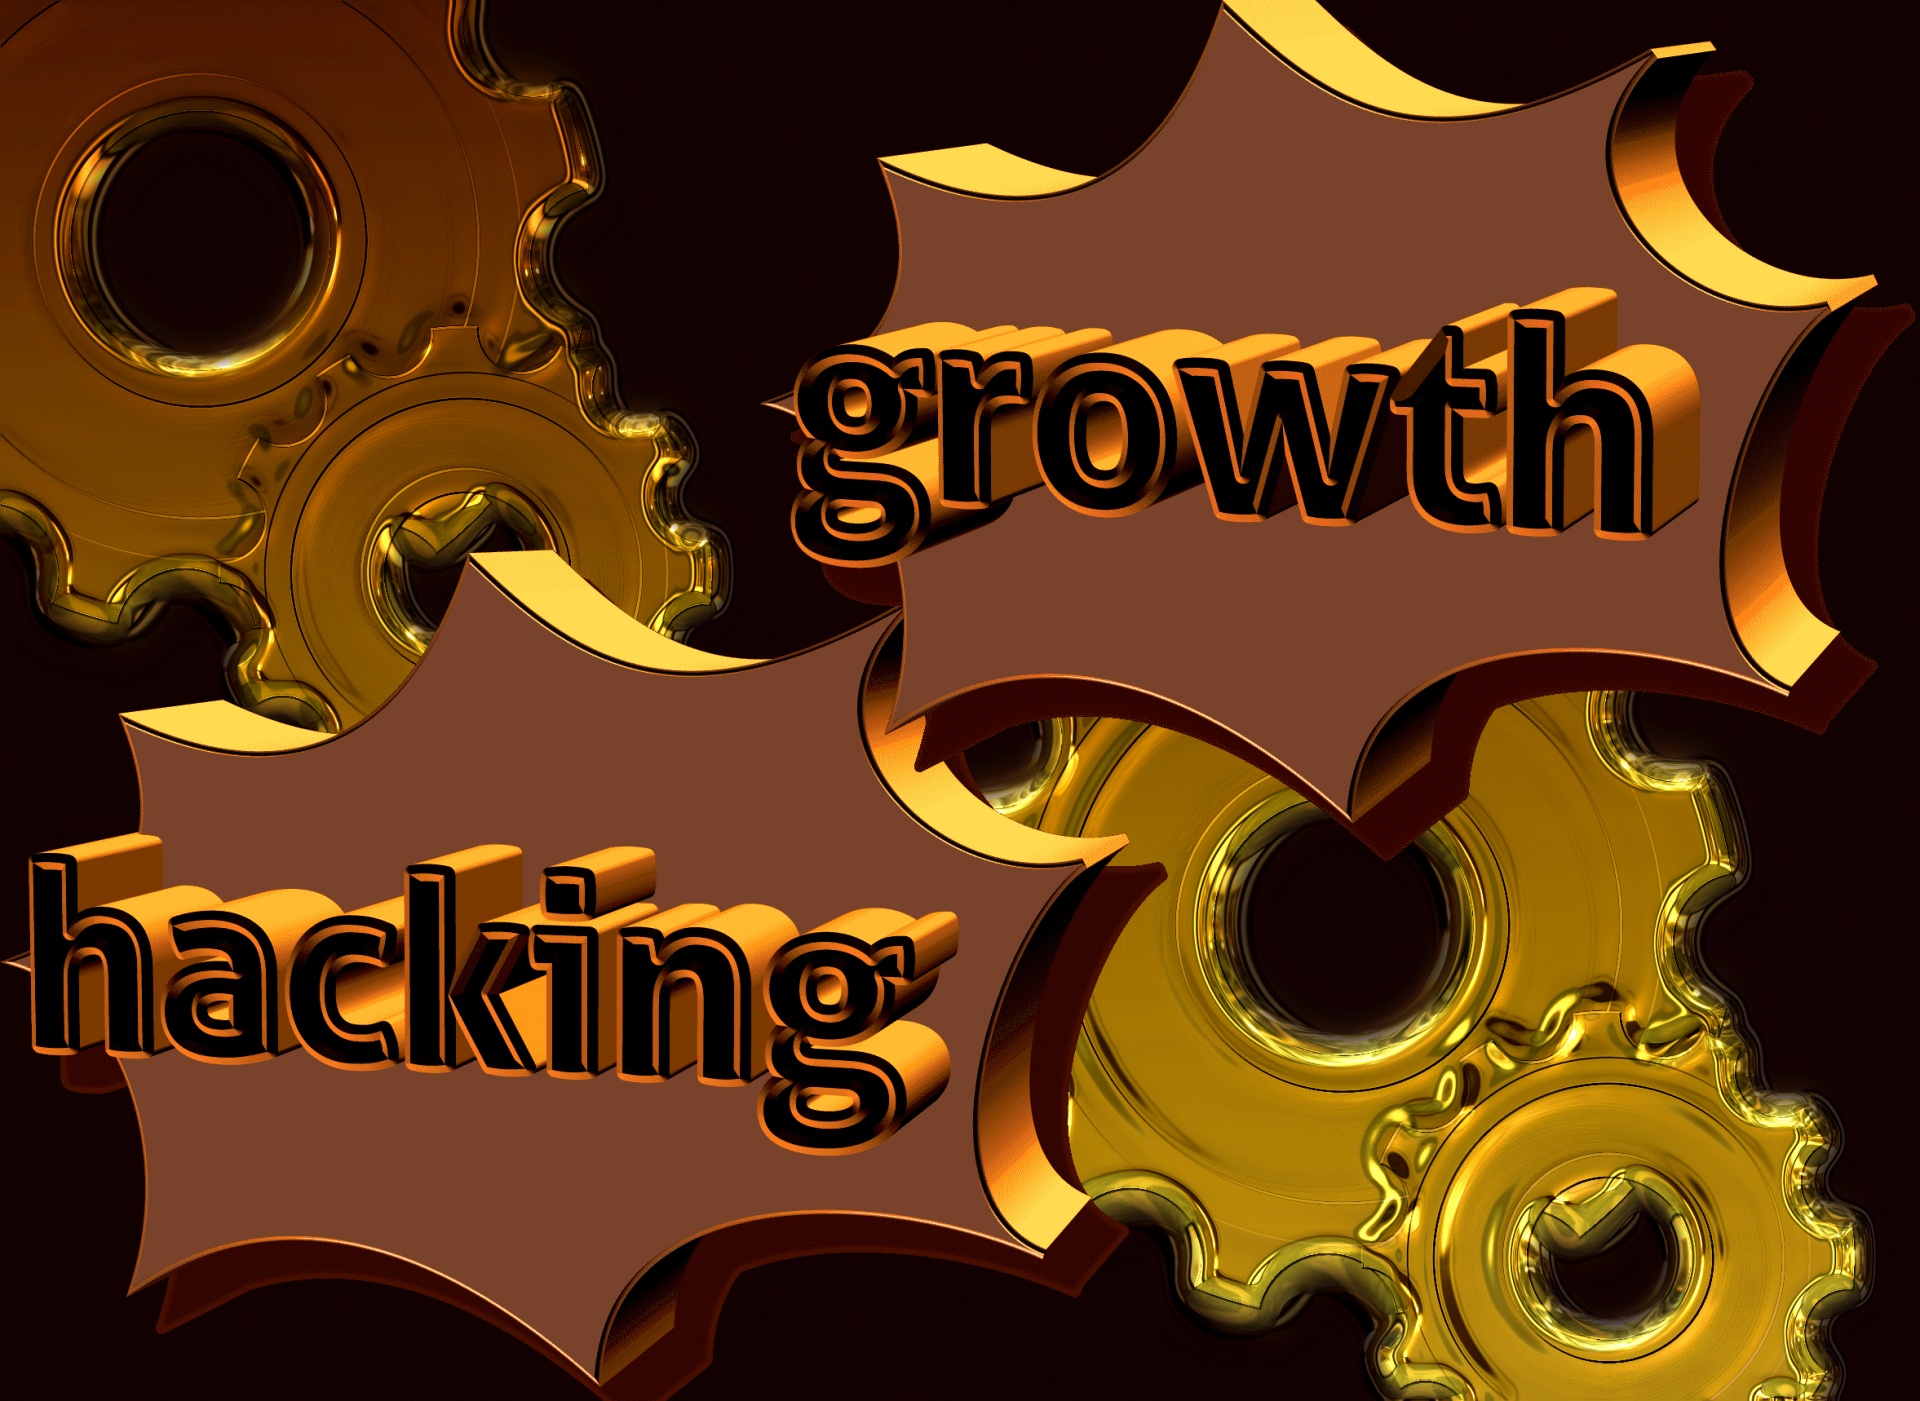 gear growth hacking free photo